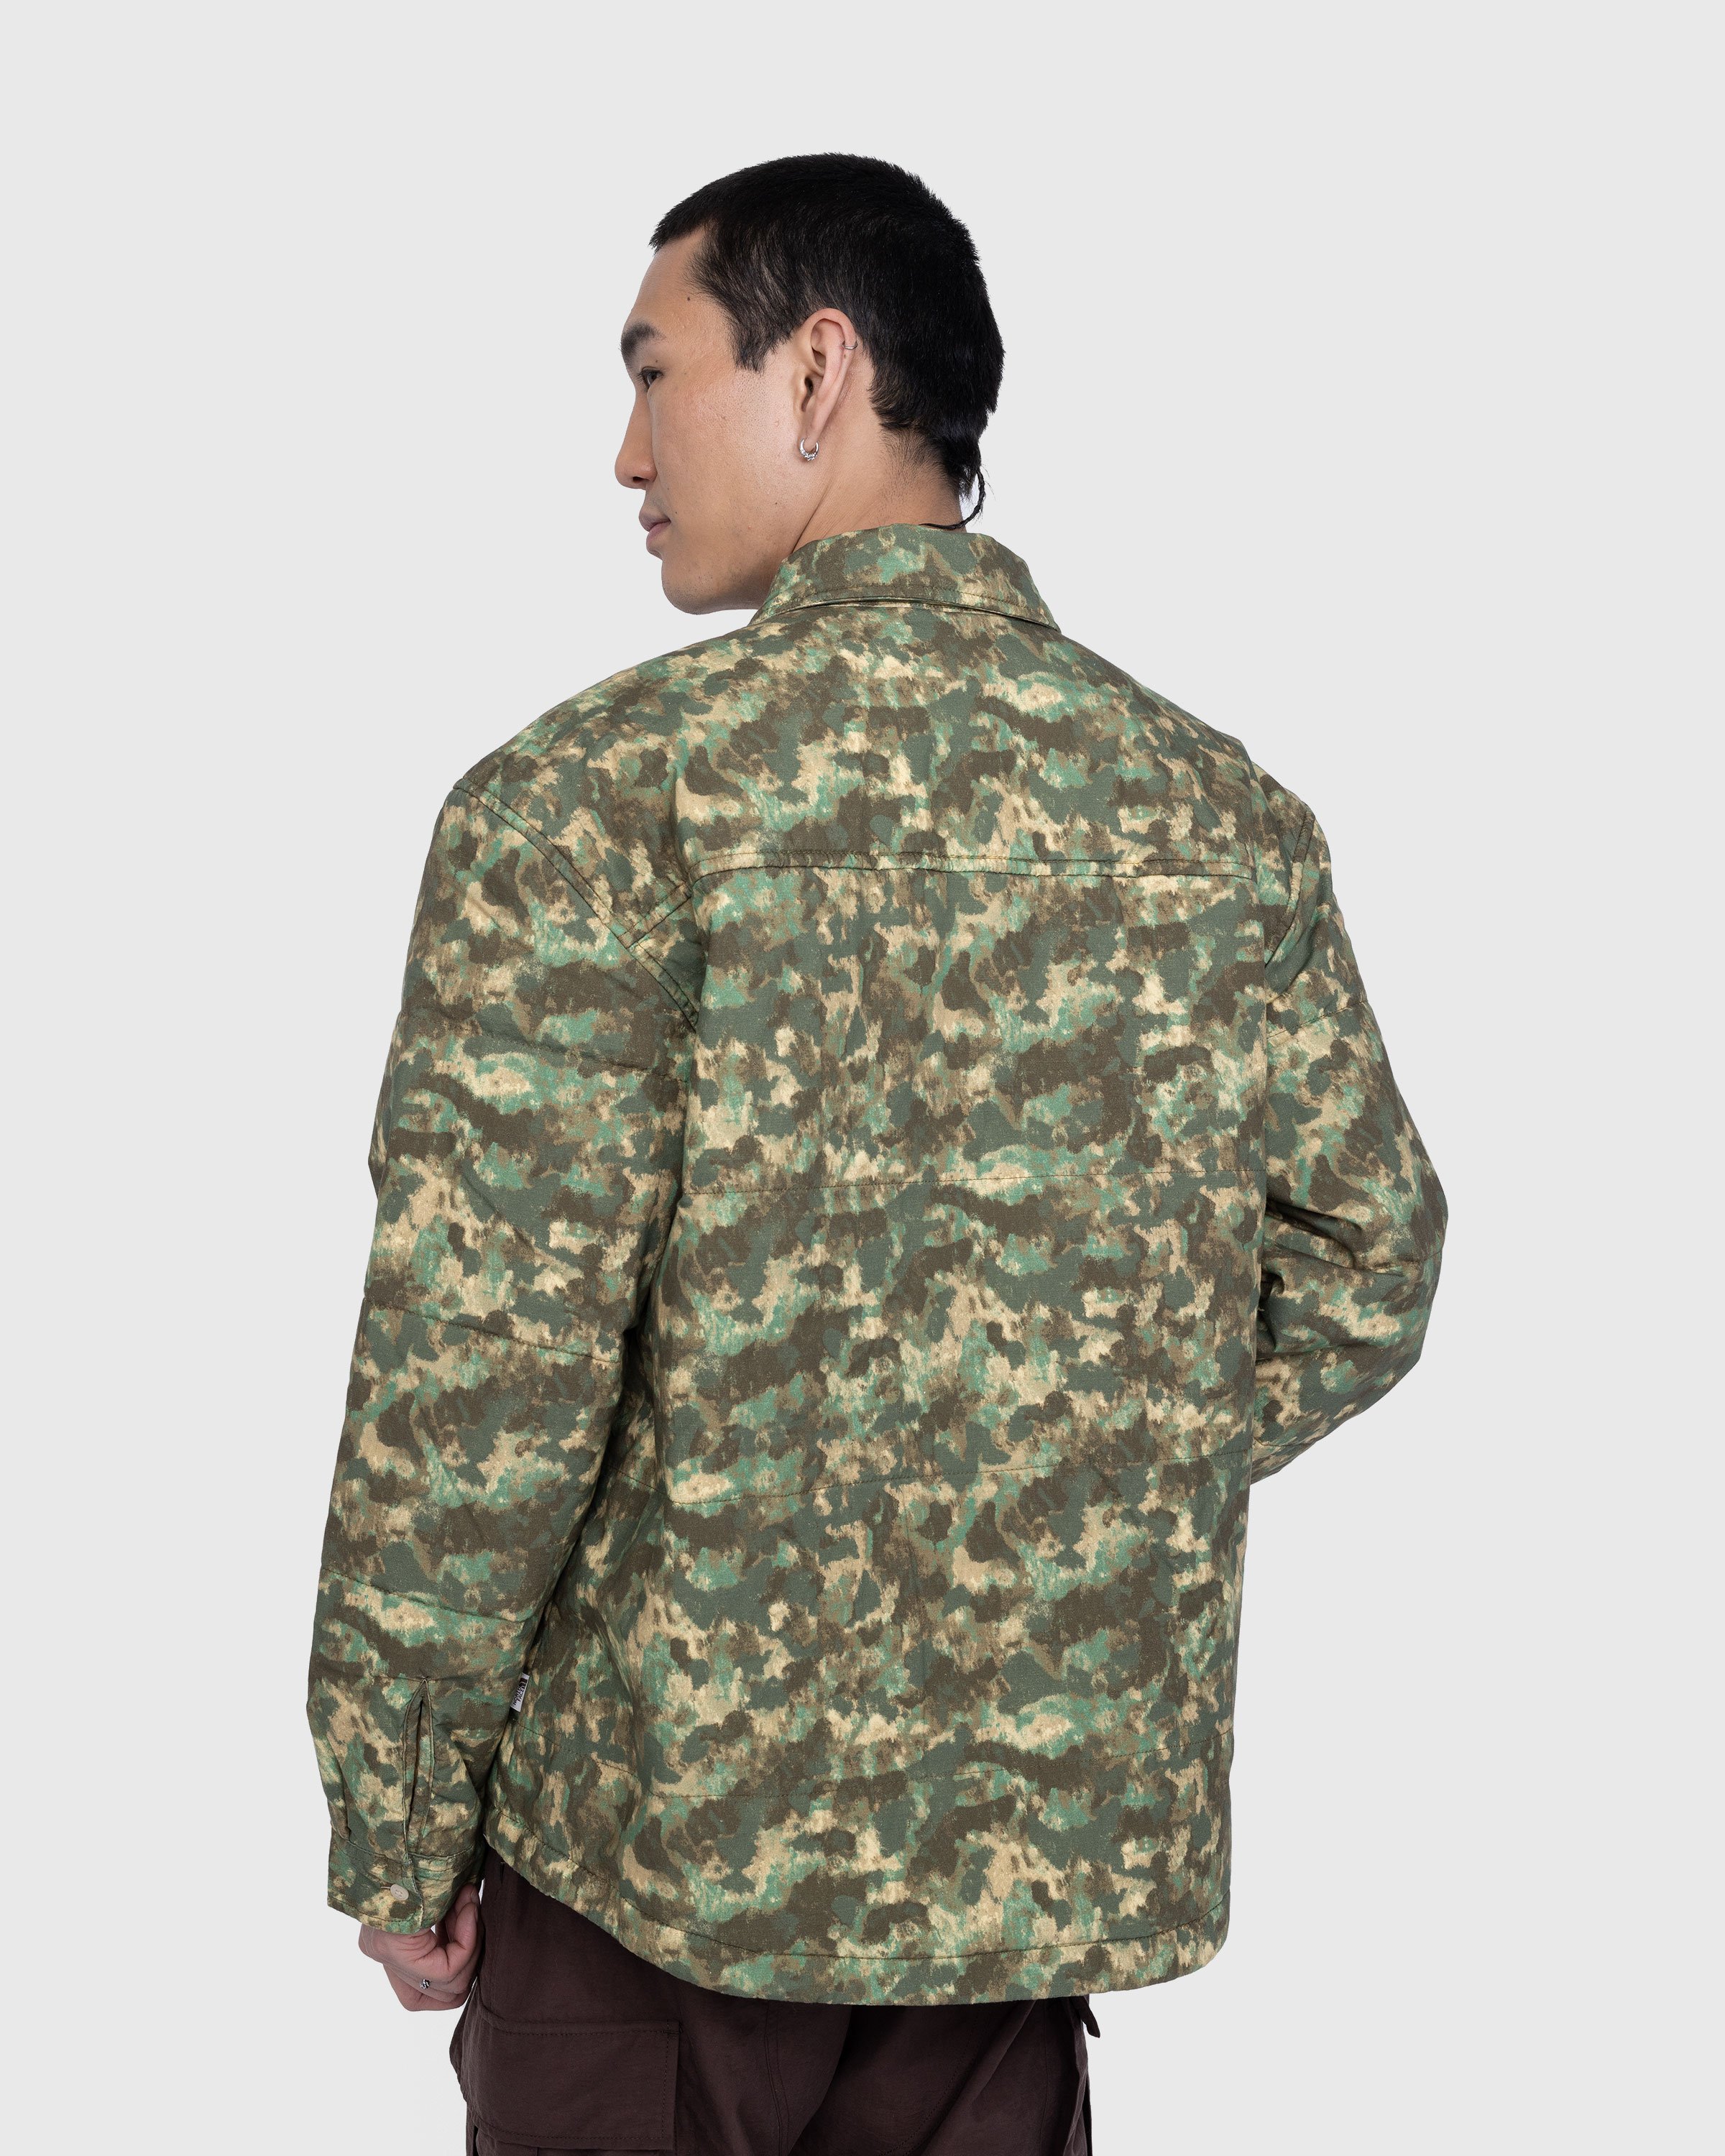 The North Face - M66 Utility Rain Jacket Military Olive/Stippled Camo Print - Clothing - Green - Image 3